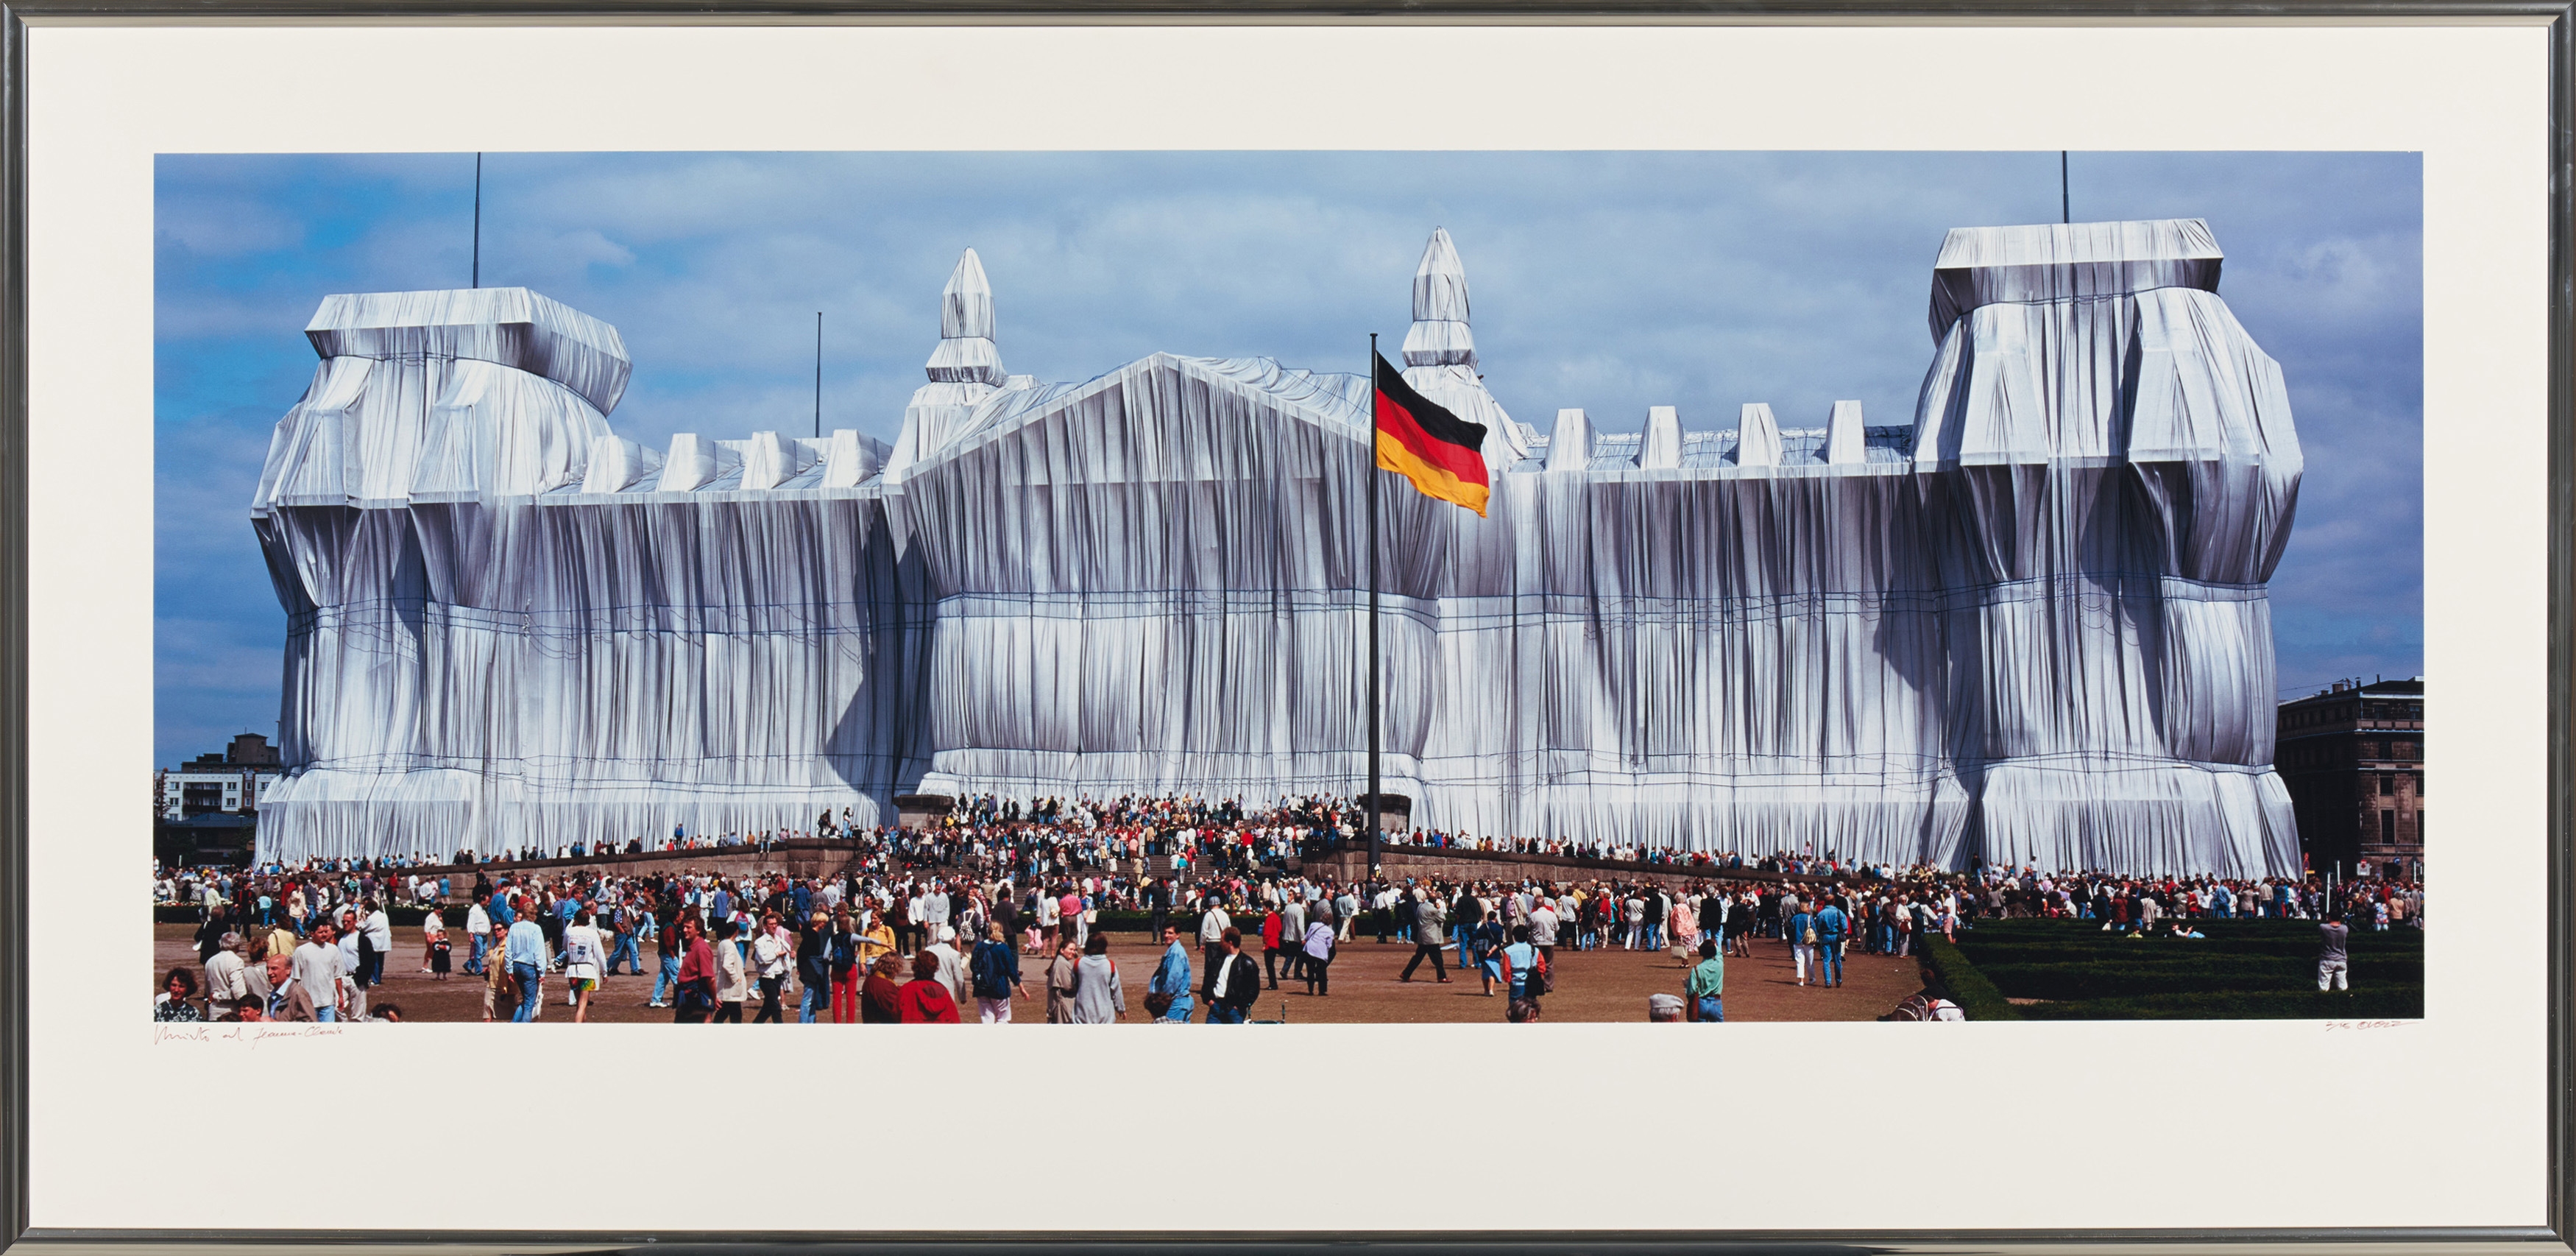 Artwork by Wolfgang Volz, Wrapped Reichstag, Project for Berlin., Made of C-print laid down on aluminium